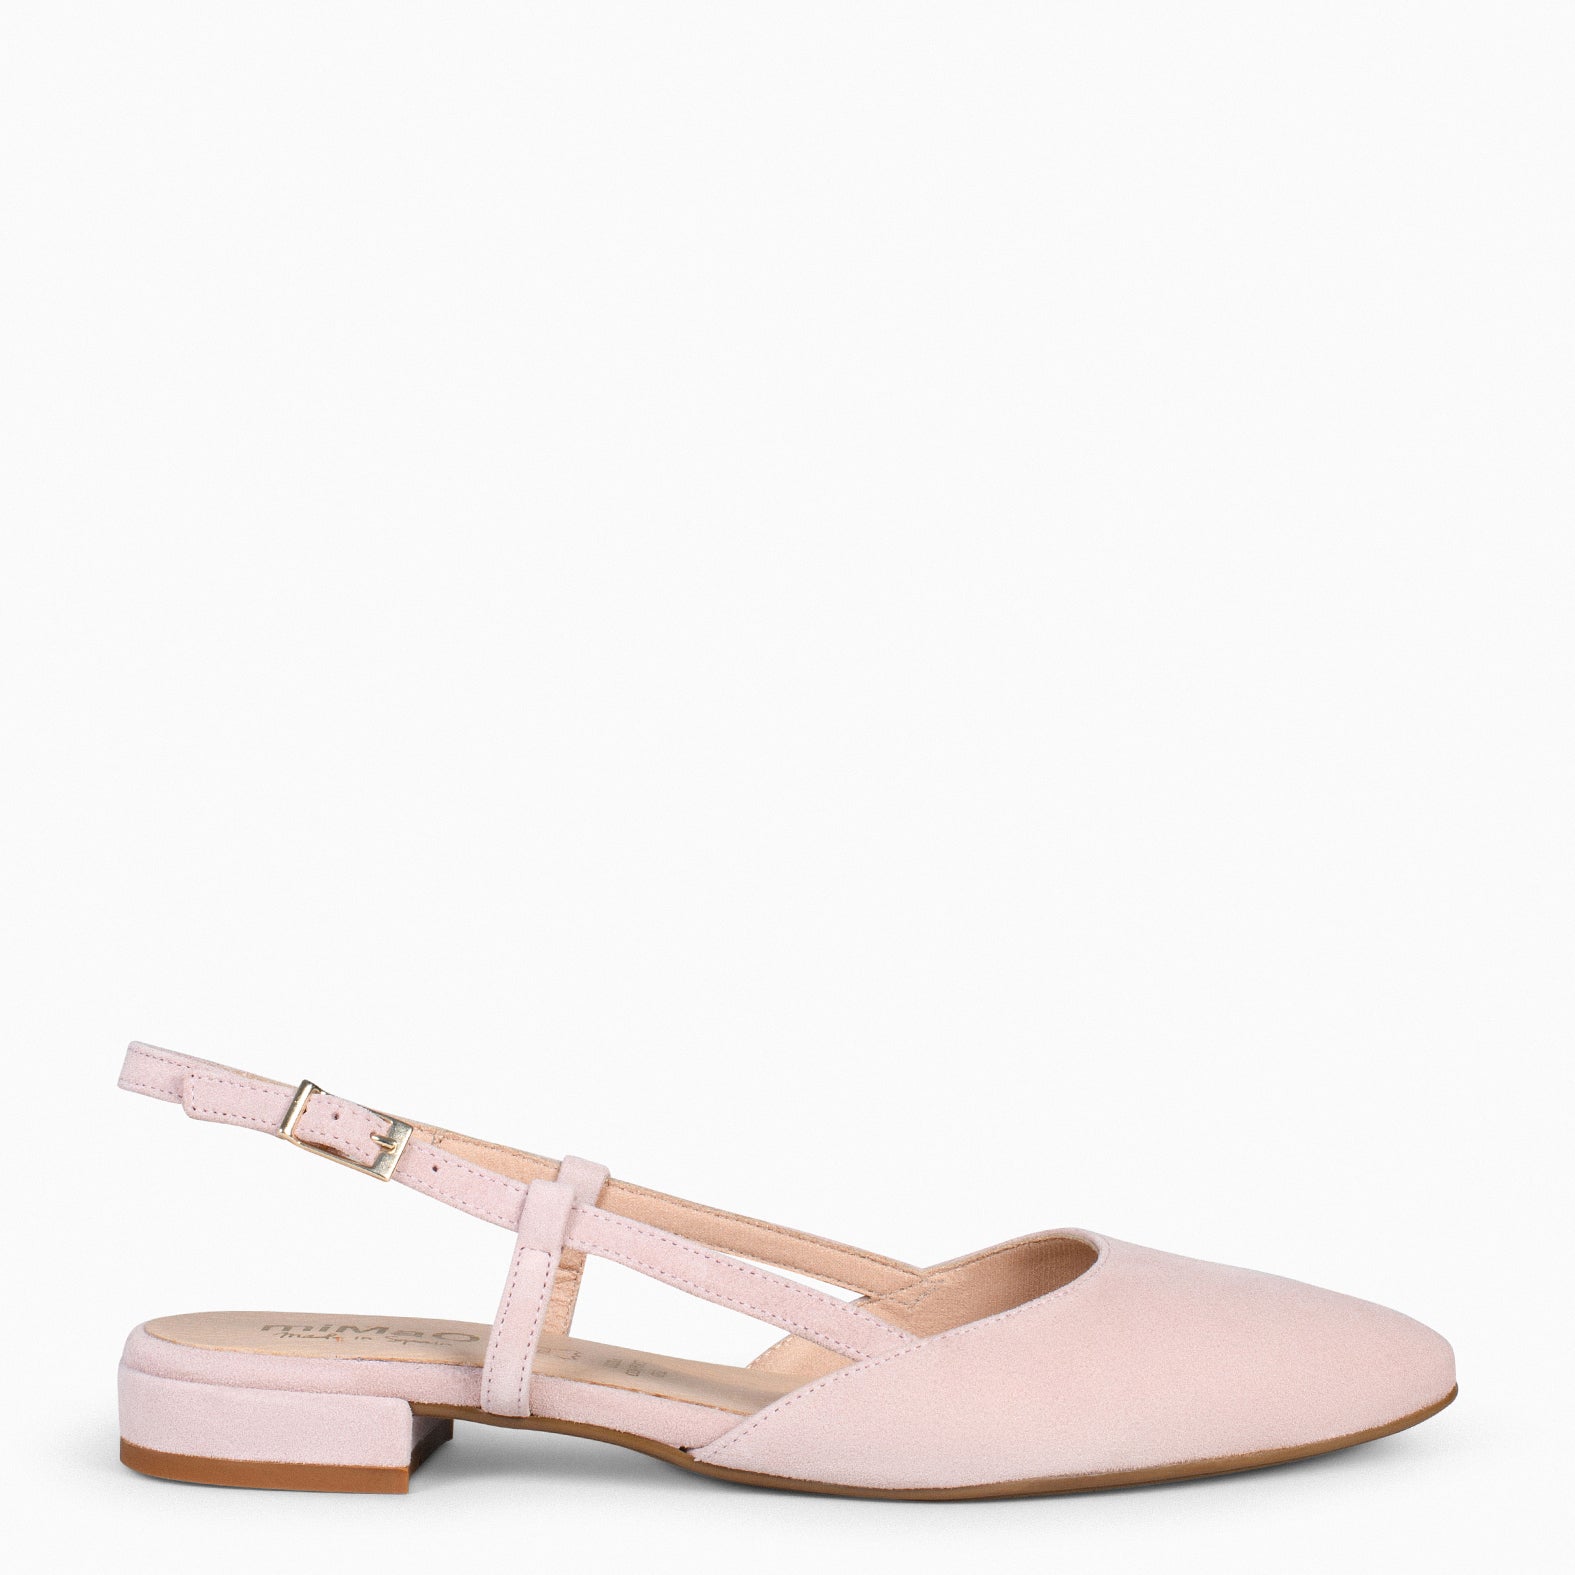 BRUNCH – Chaussures Slingbacks plates NUDE